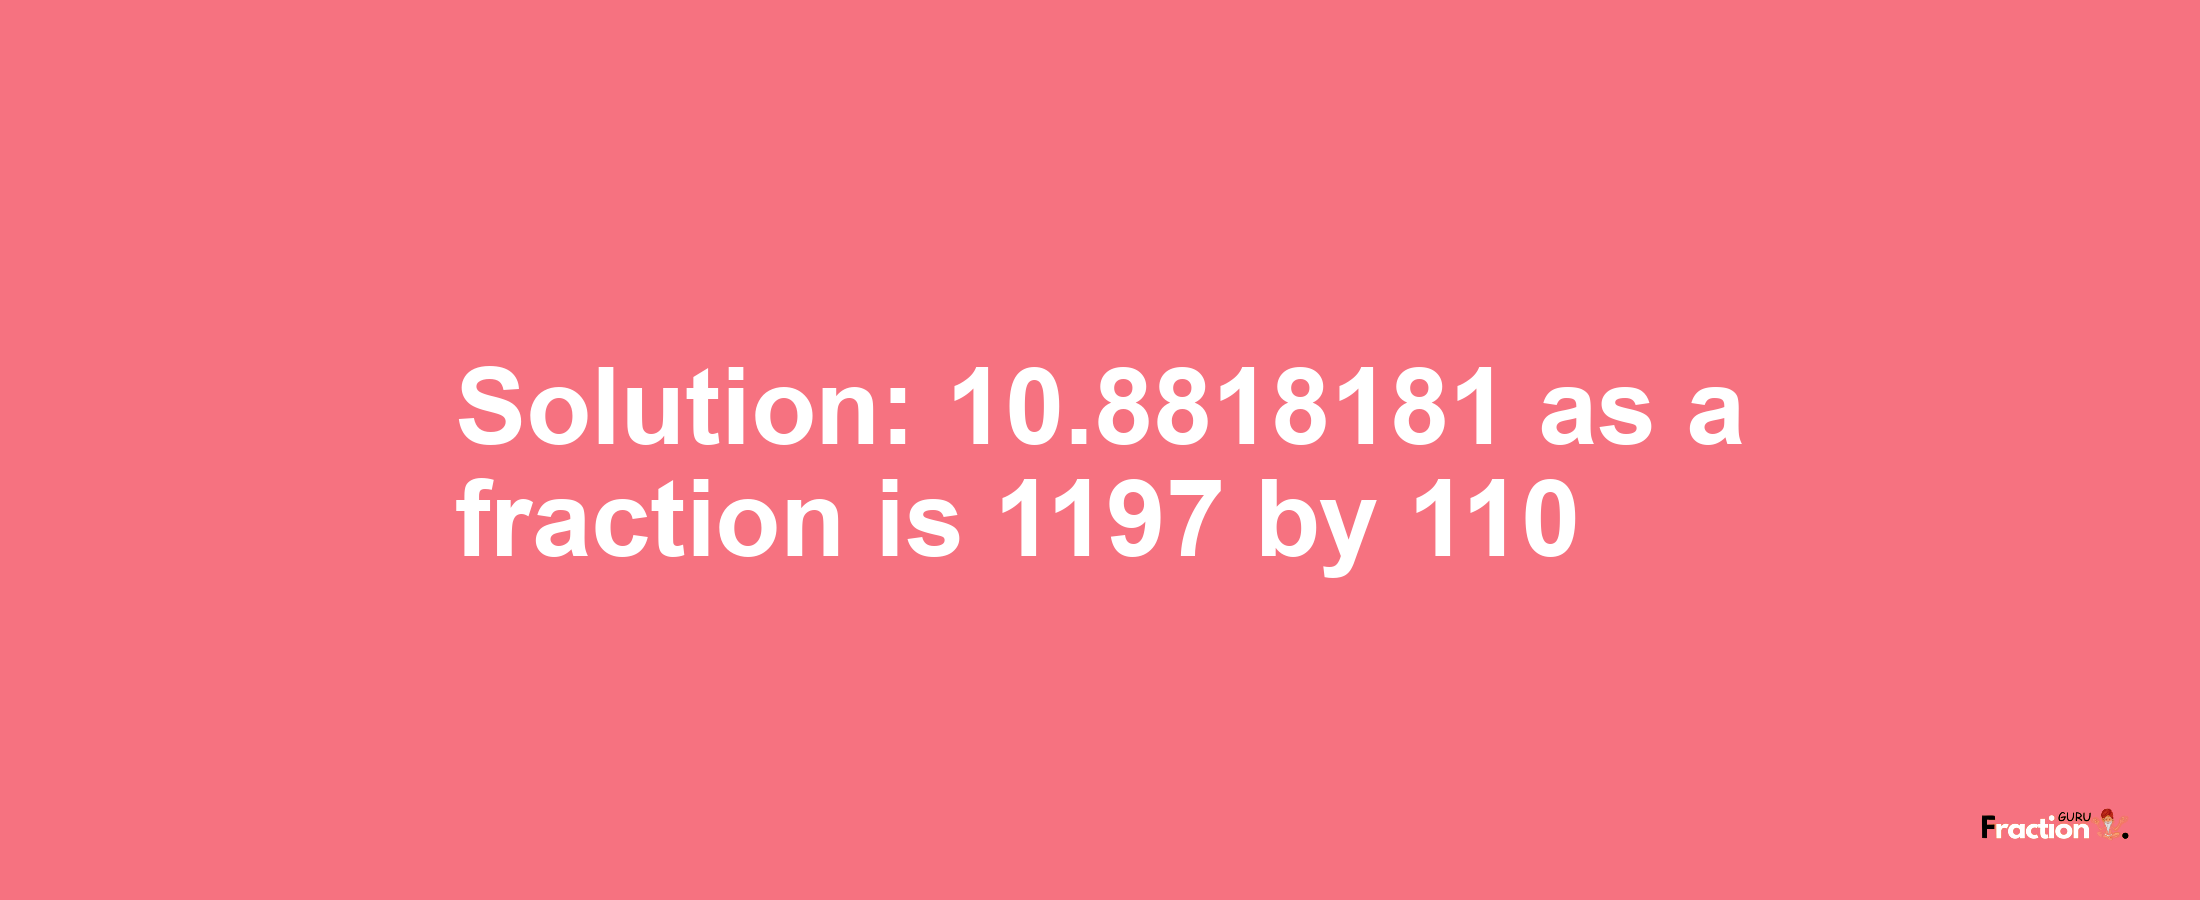 Solution:10.8818181 as a fraction is 1197/110